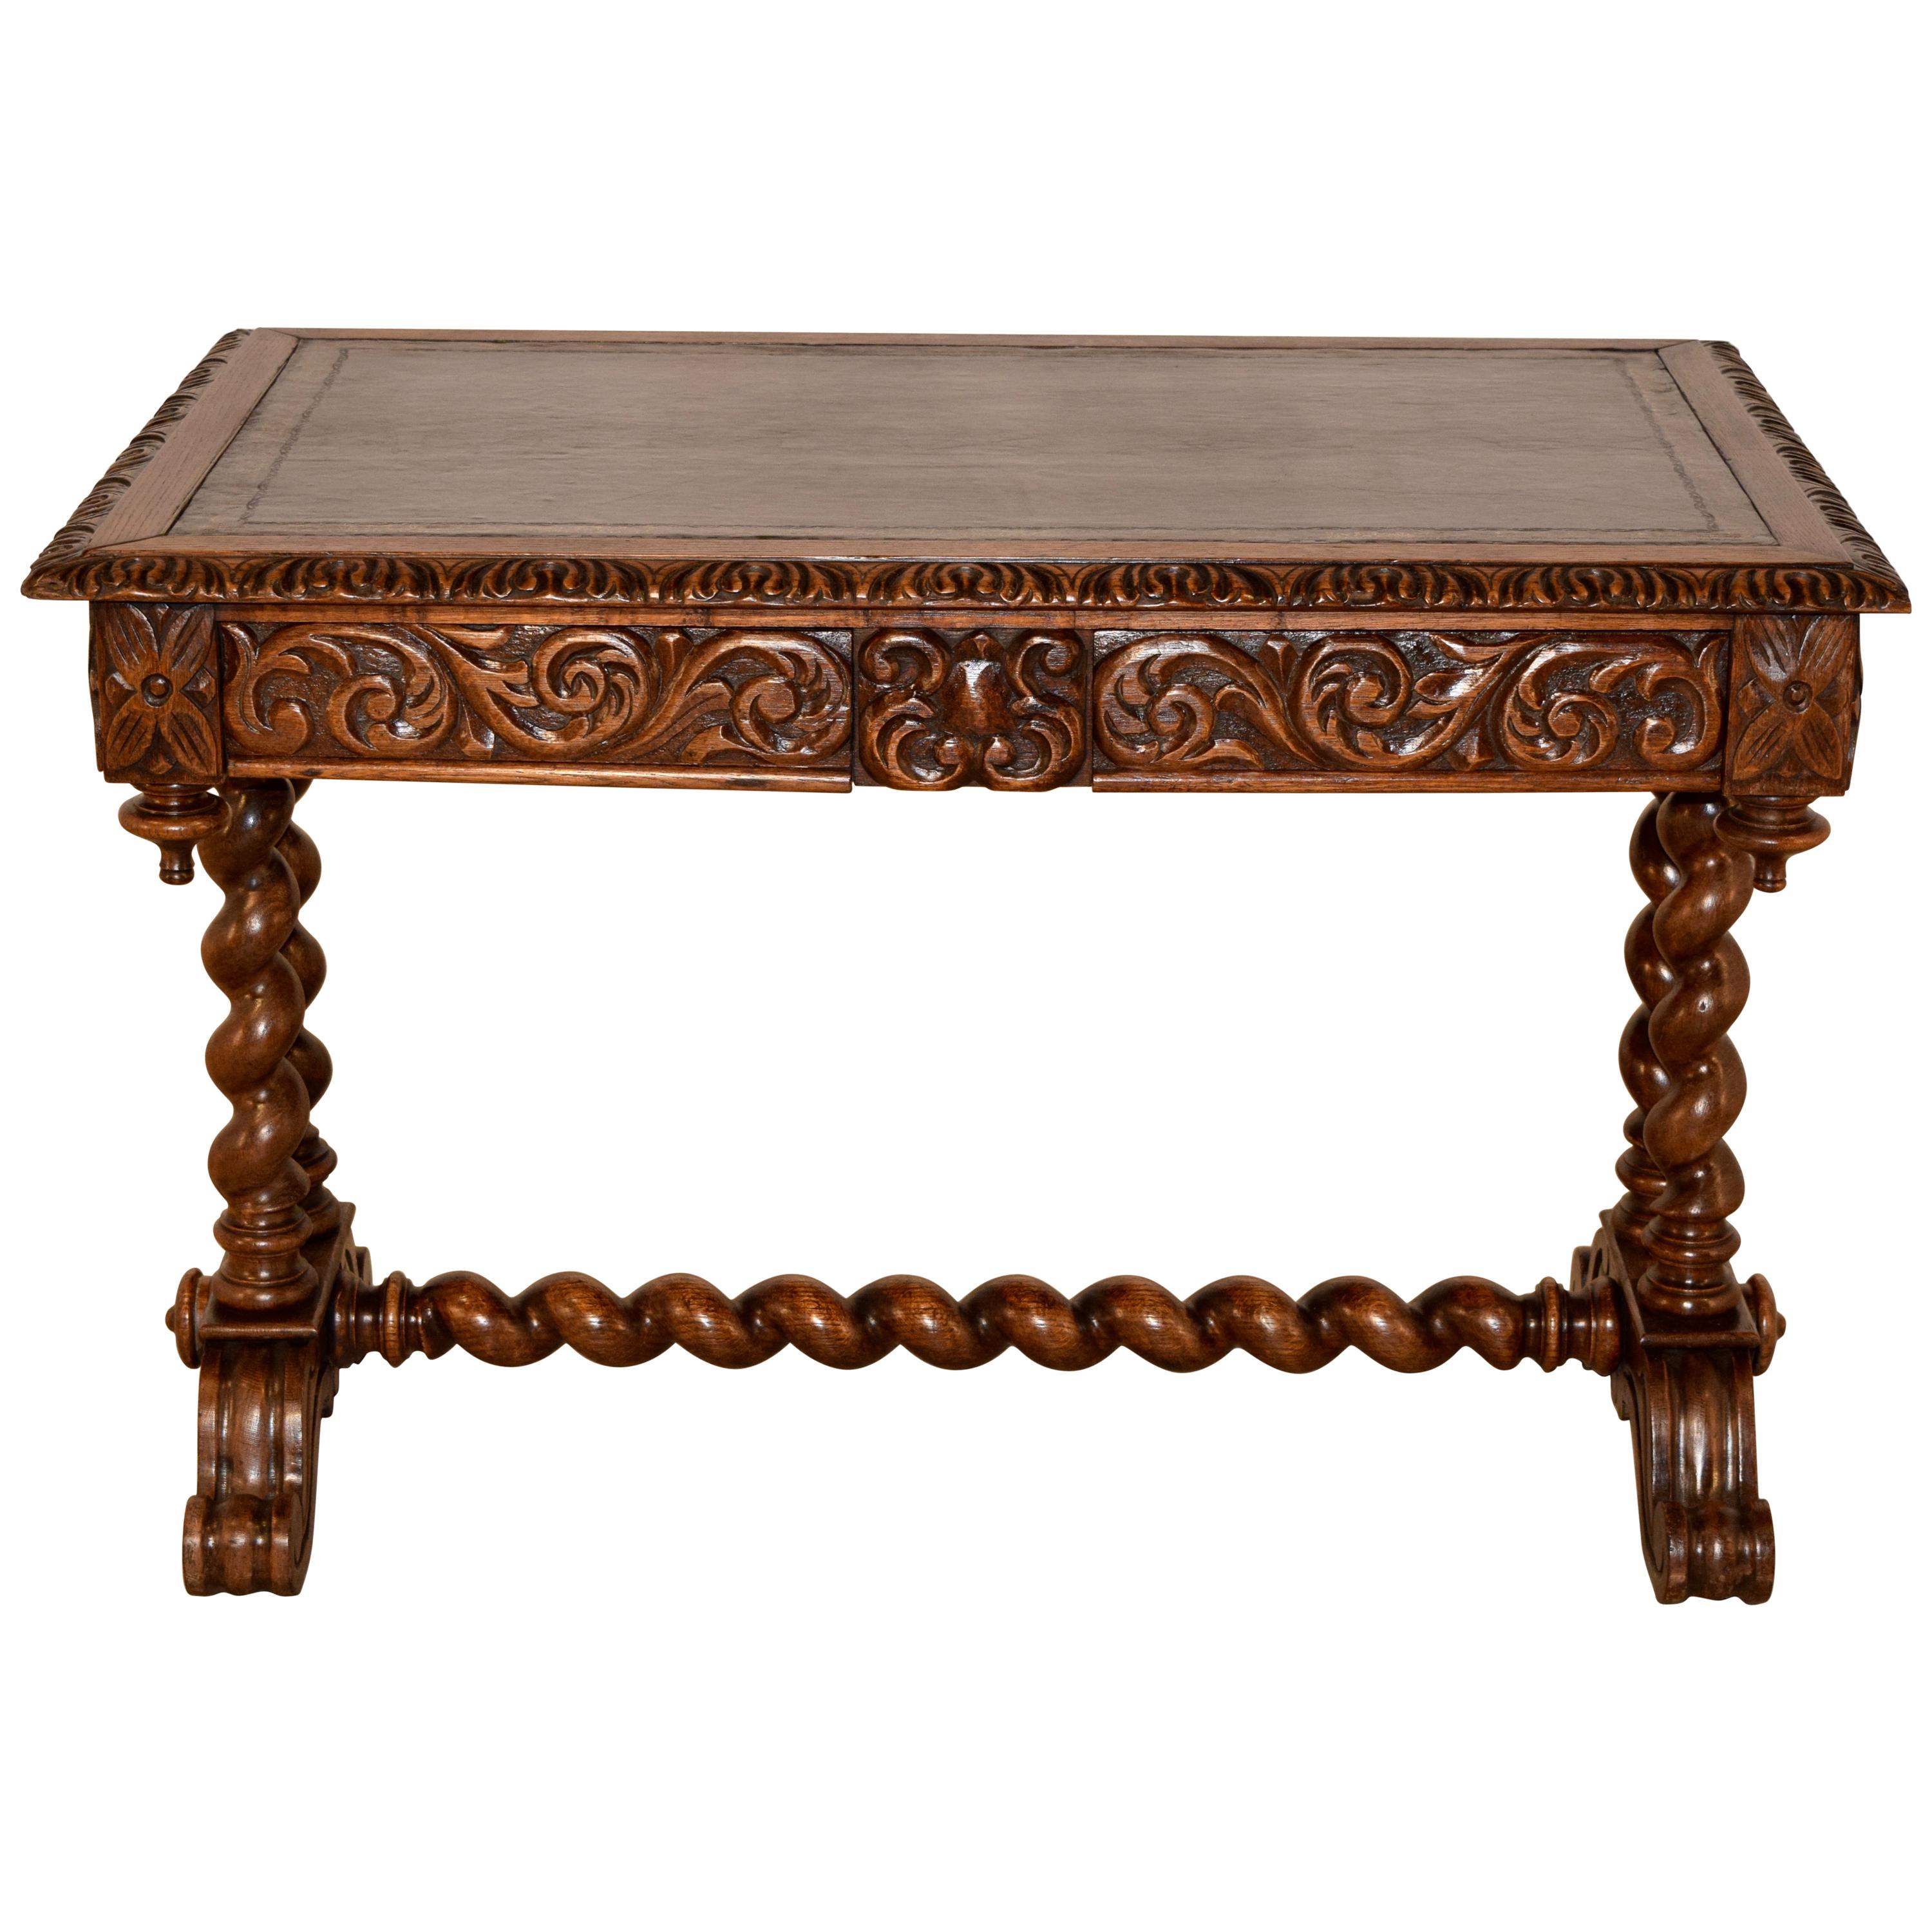 19th Century Carved Desk with Leather Top